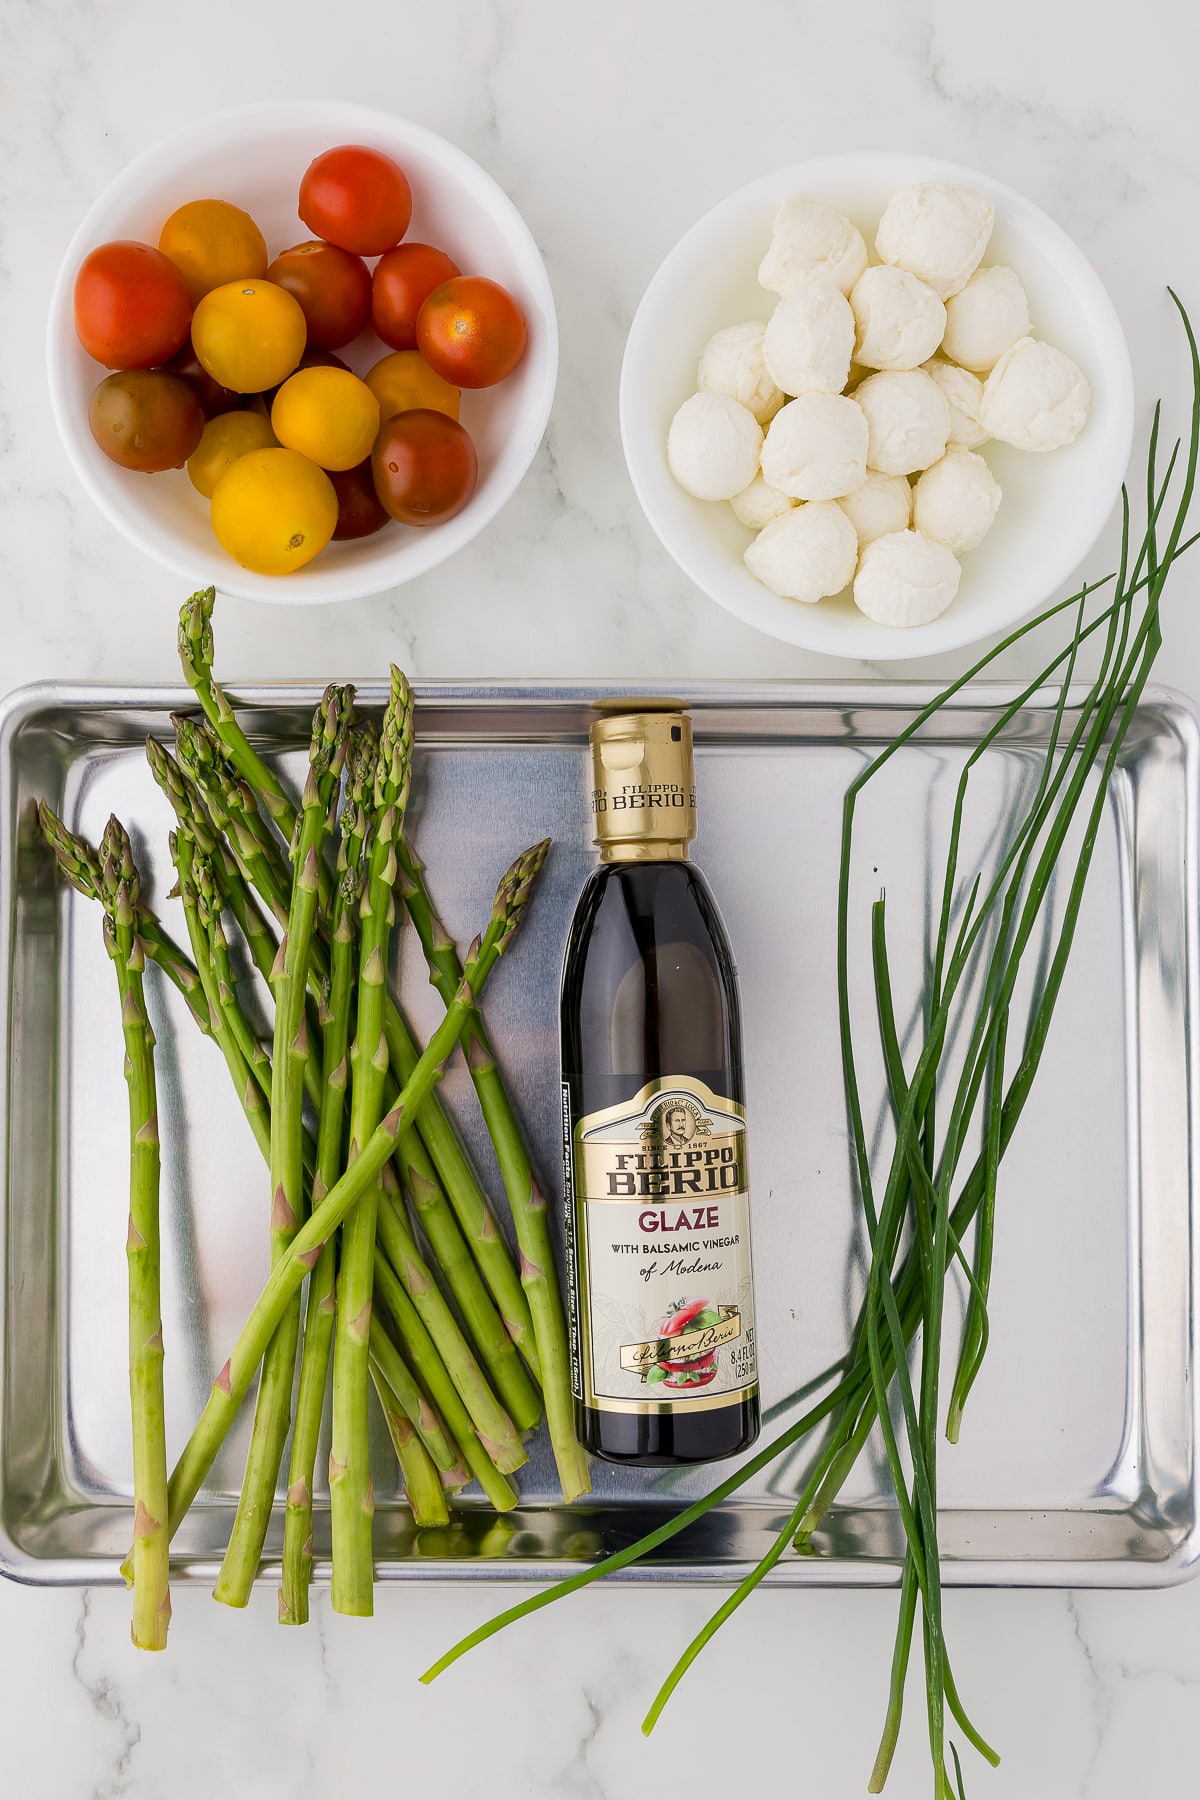 ingredients for tomato tulips: a bowl of yellow, variegated, and cherry tomatoes, a bowl of mozzarella balls, and a mini cookie sheet with asparagus spears, balsamic glaze, and chives